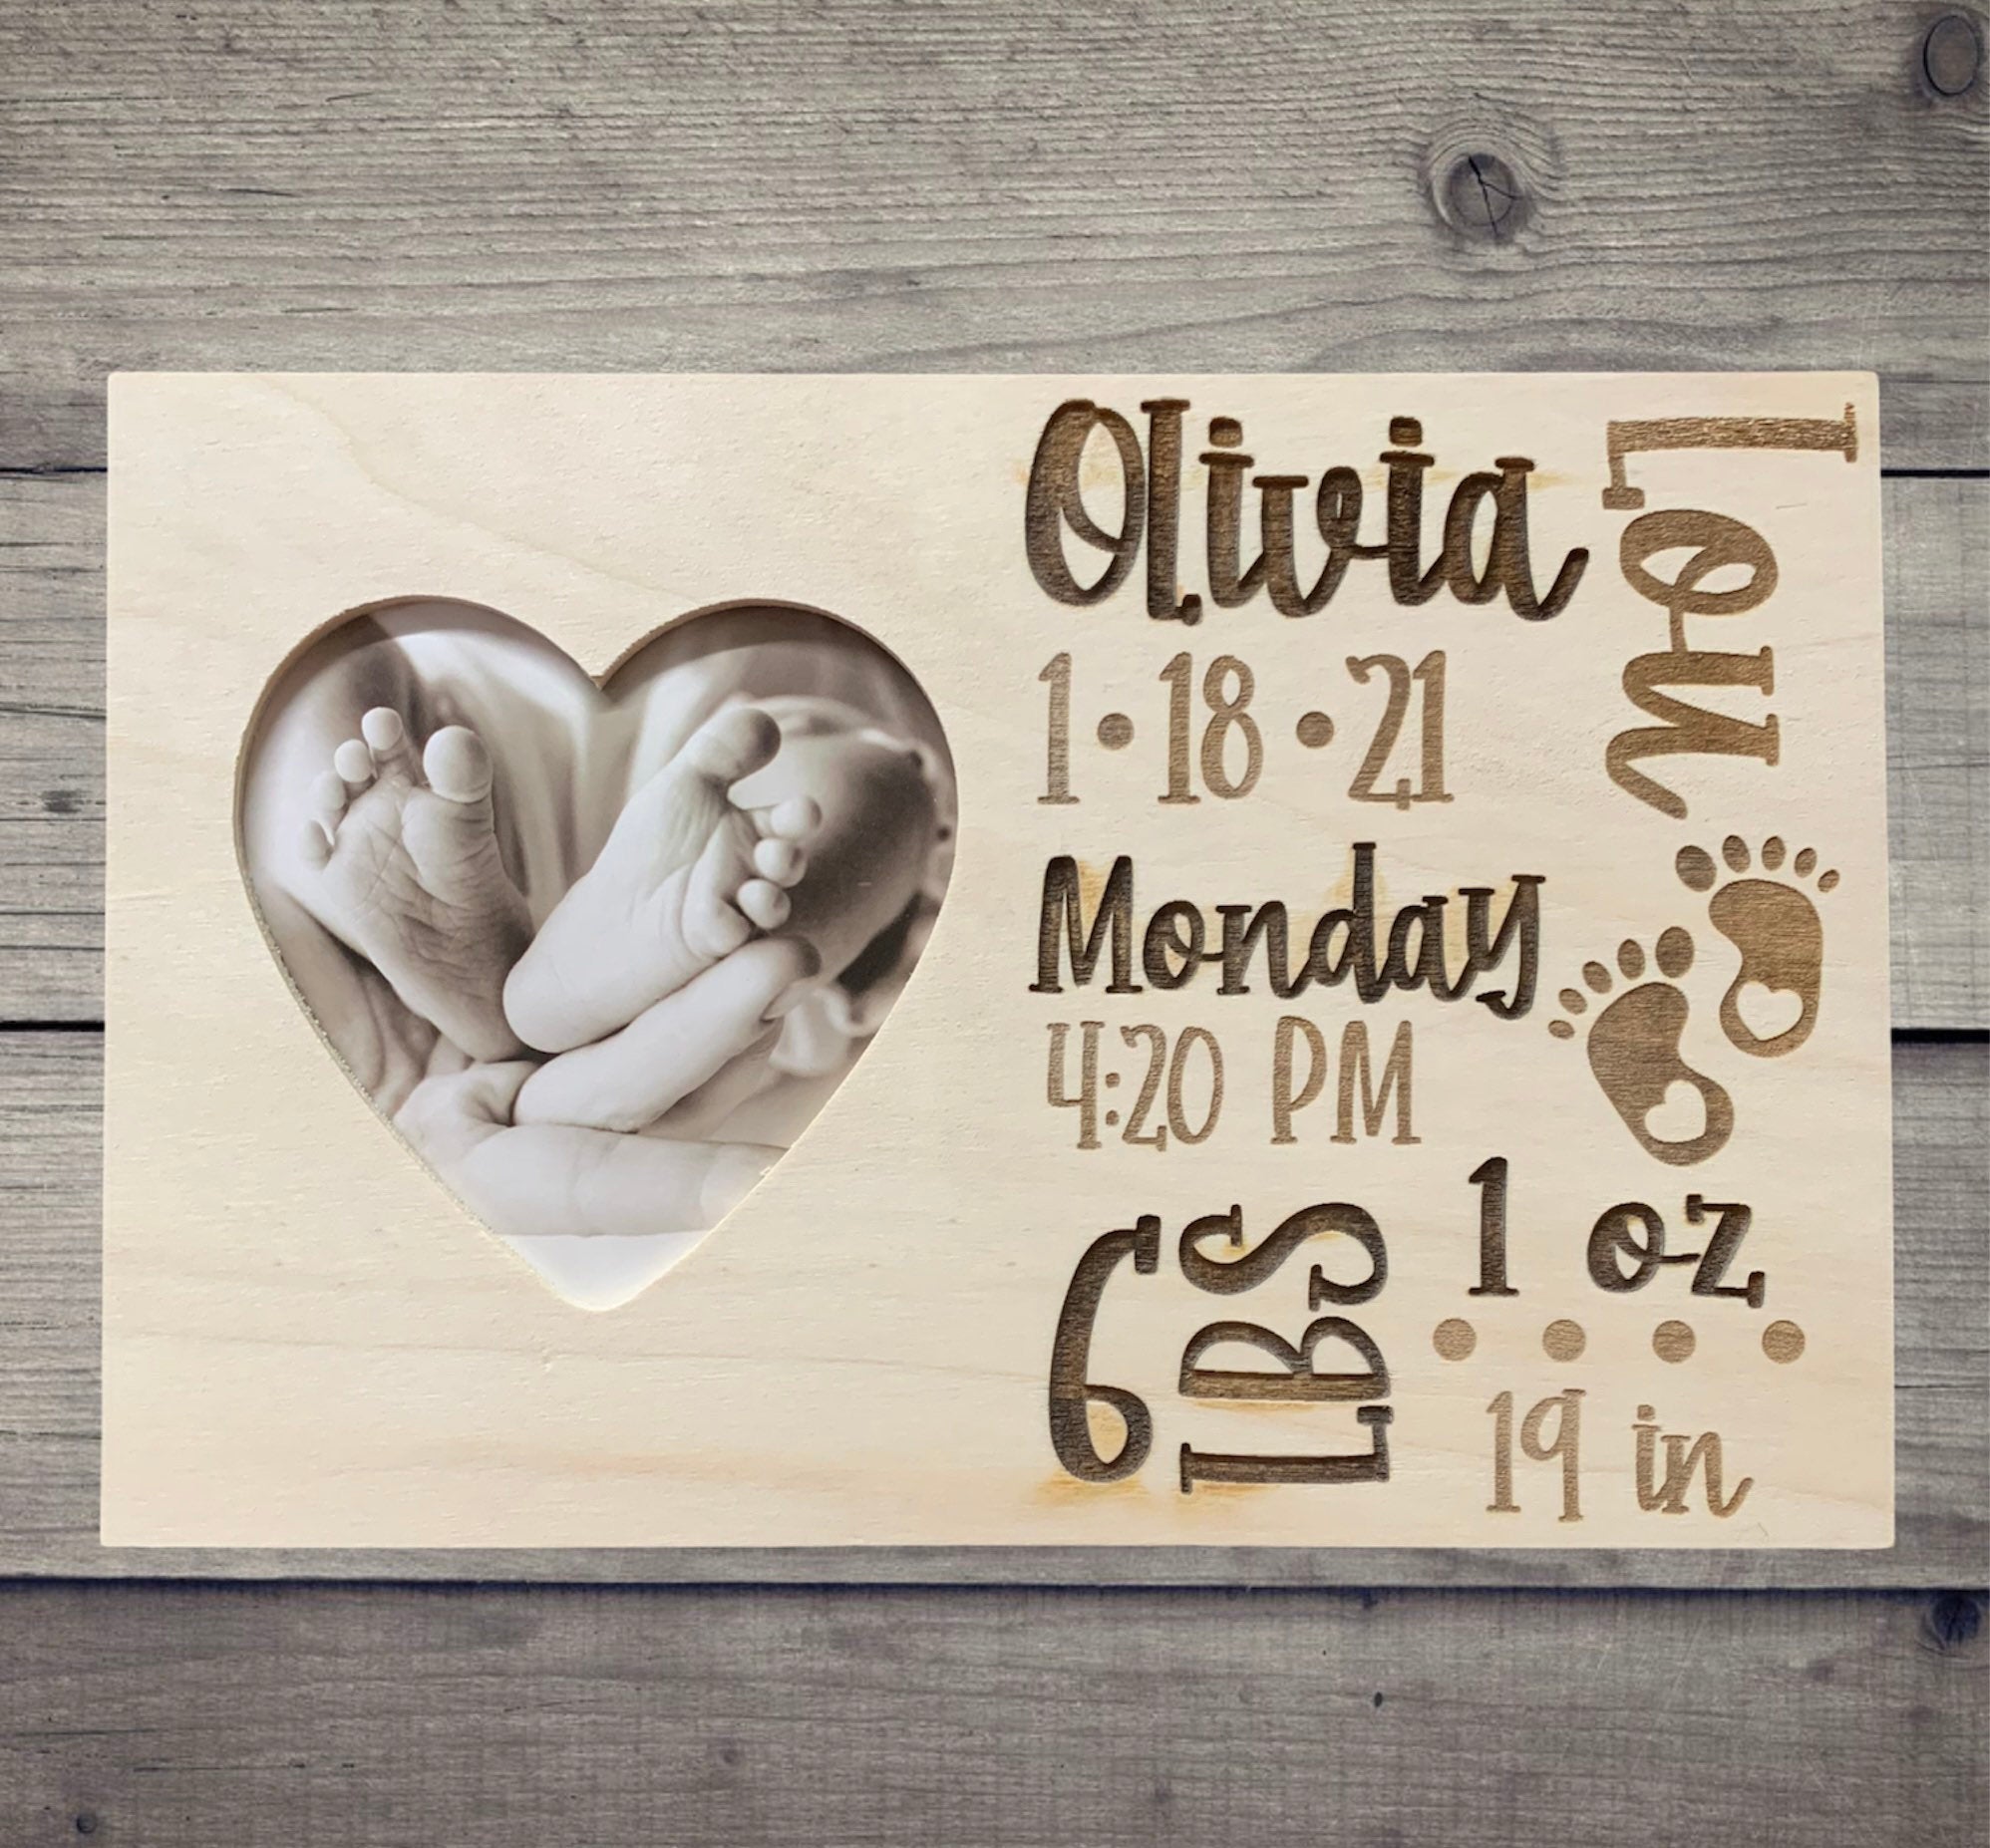 Birth Stats Photo Frame | Personalized Photo Frame | Picture Frame with Birth Stats | Newborn Gift